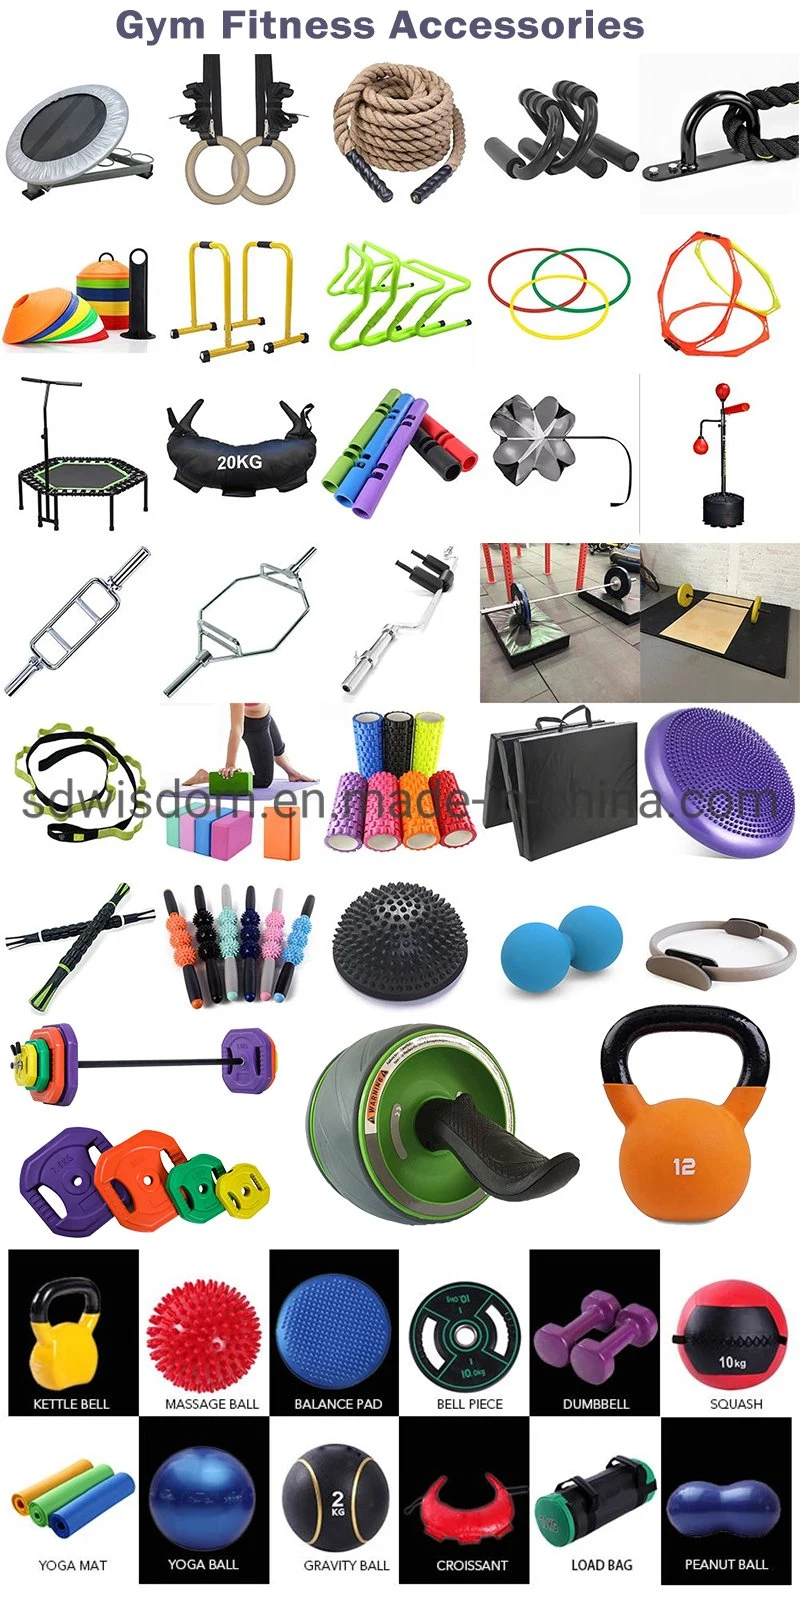 F9602 Bodying Building Rig Products Life Fitness Rack Gym Fitness Machine Crossfit Equipment Synergy 360 Multi Functional Trainer for Bodying Building